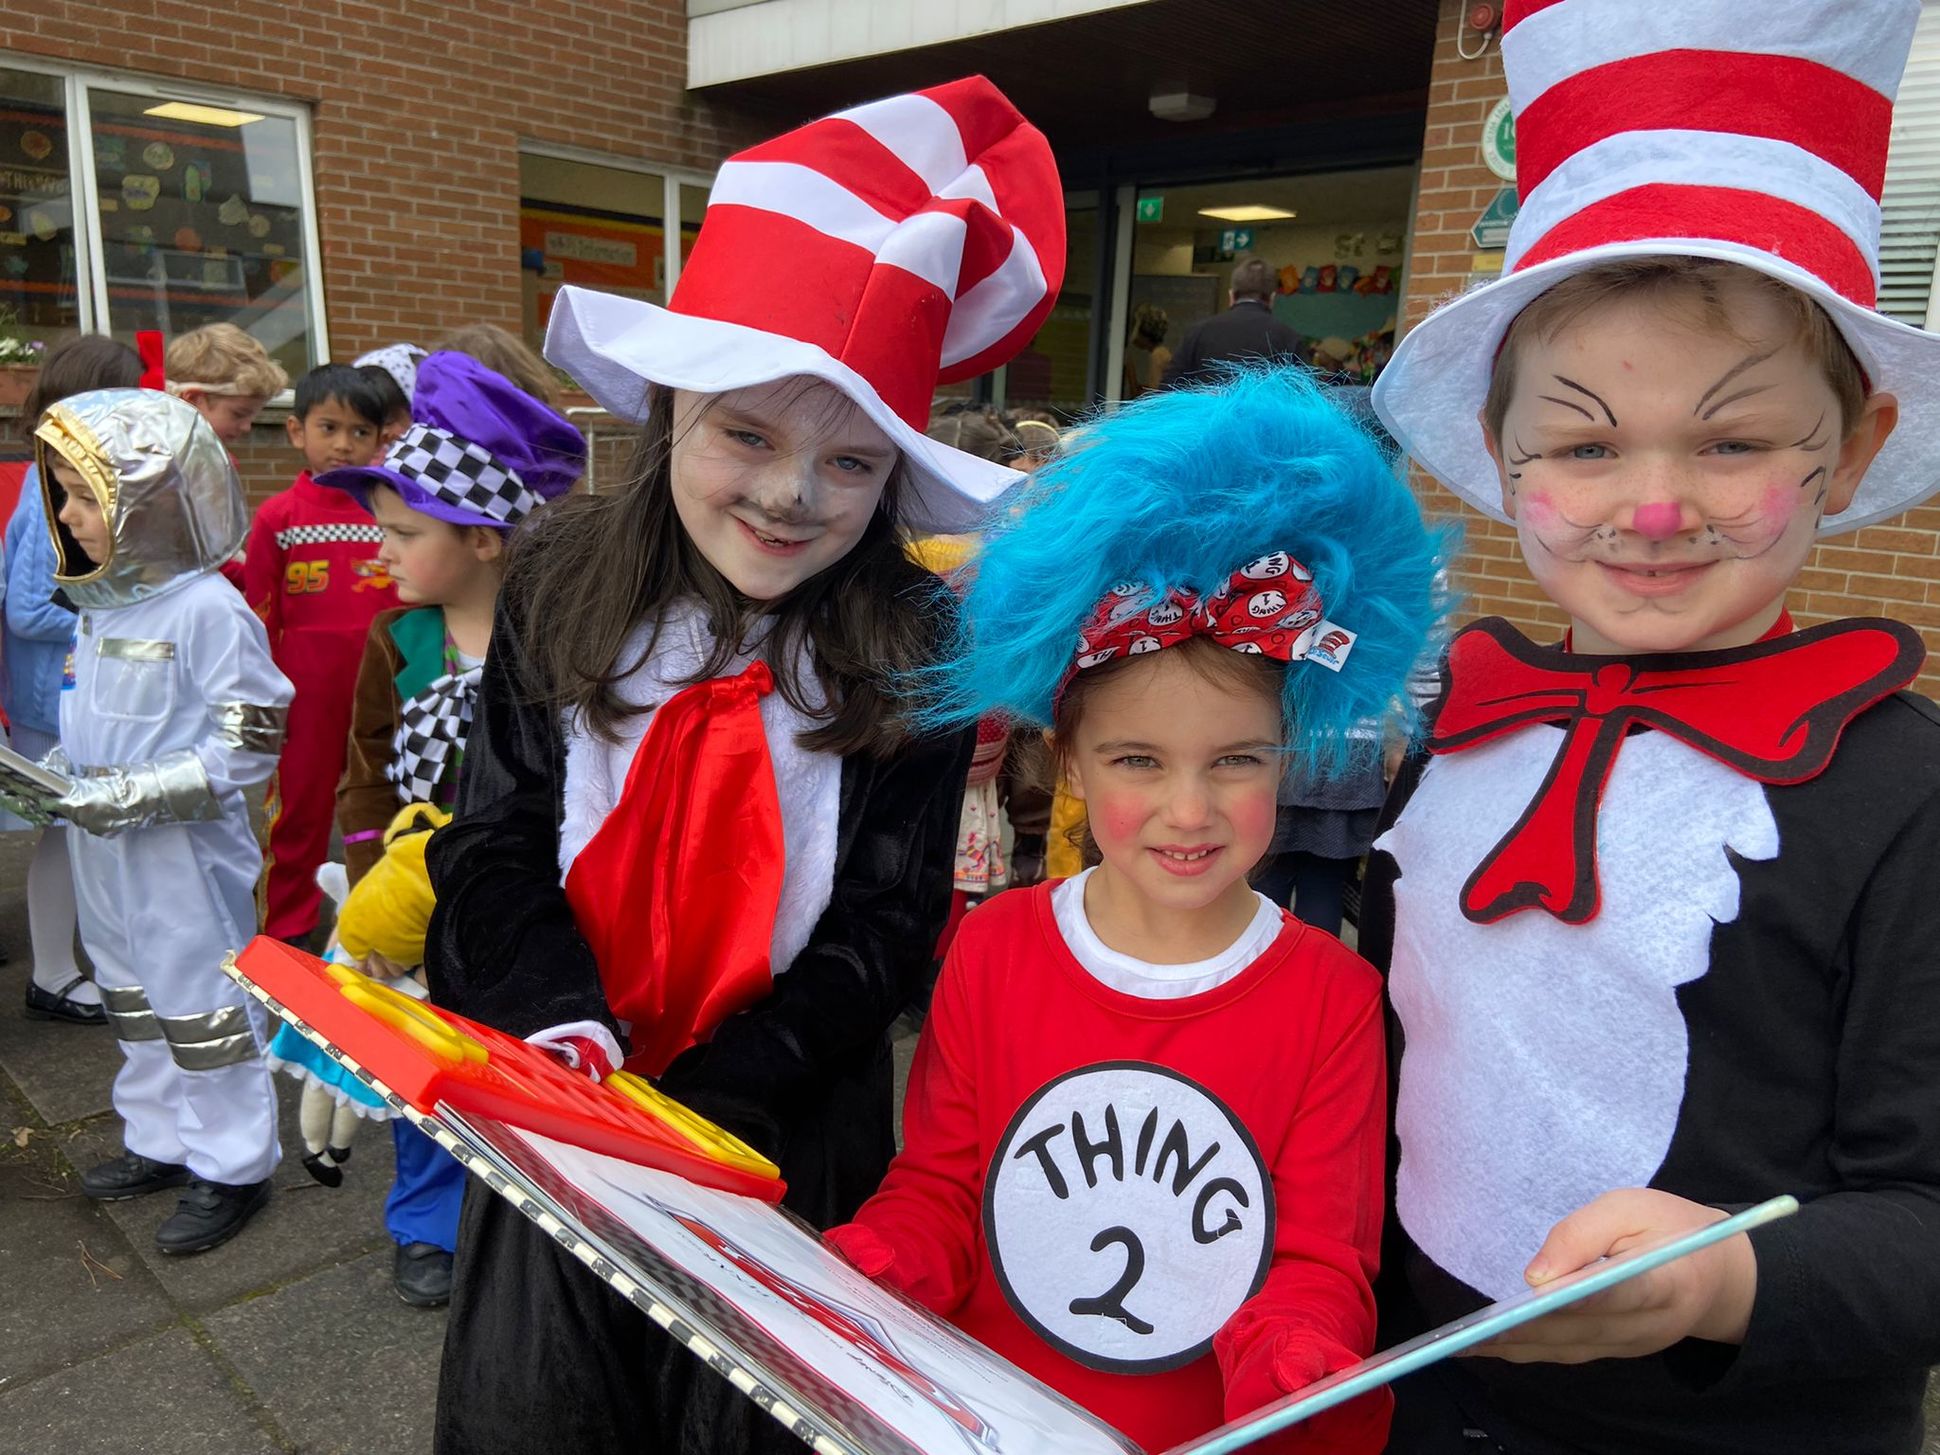 CAT IN THE HAT: James, Vanna and Aimee took inspiration from the Dr Seuss classic